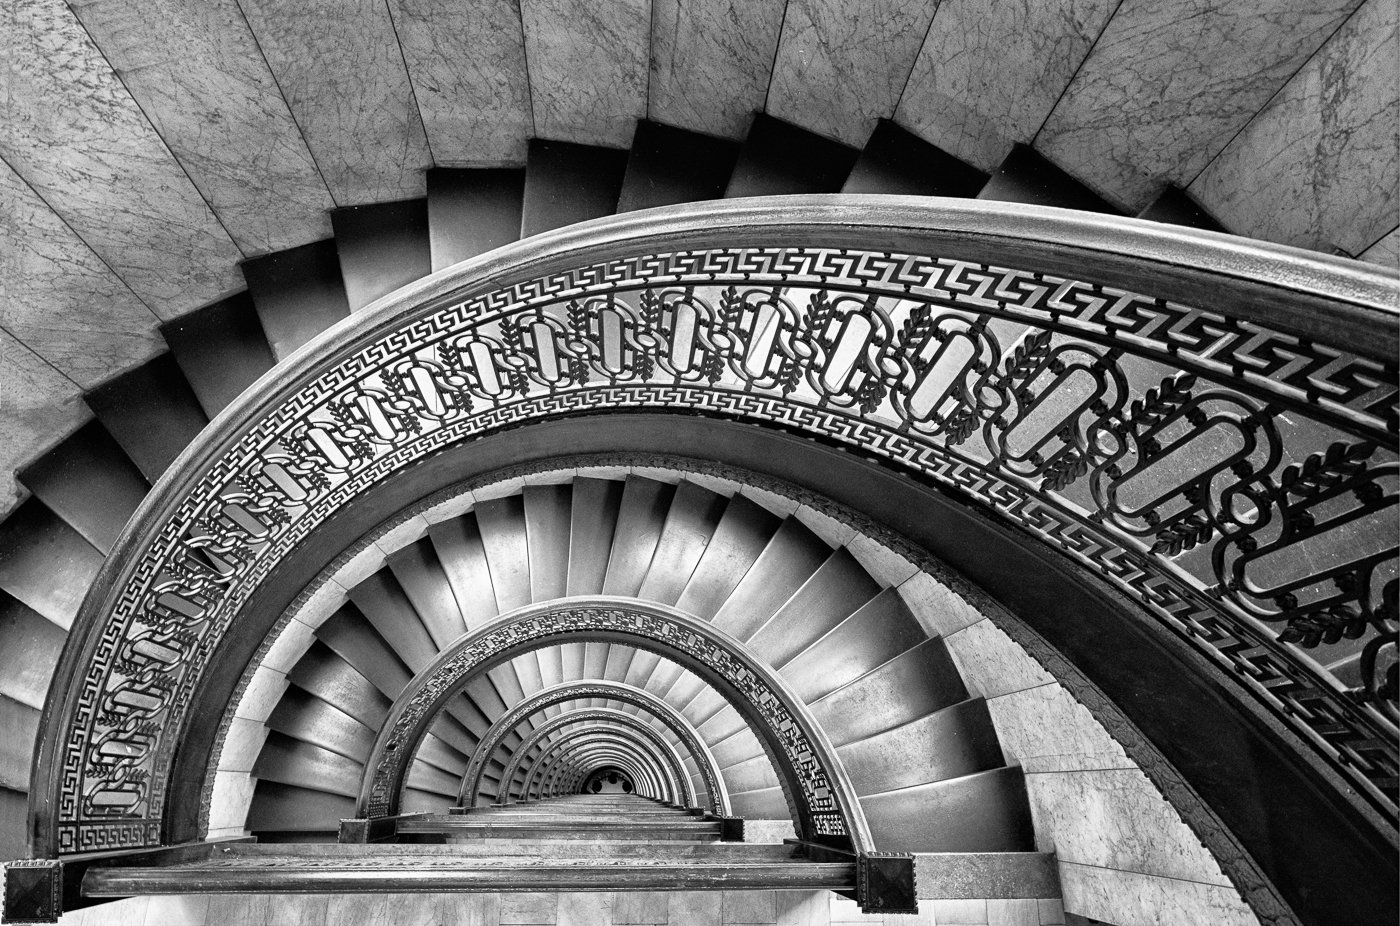 Bank Tower Stairs,R Gary Butler,National Park Photography Club,1 HM